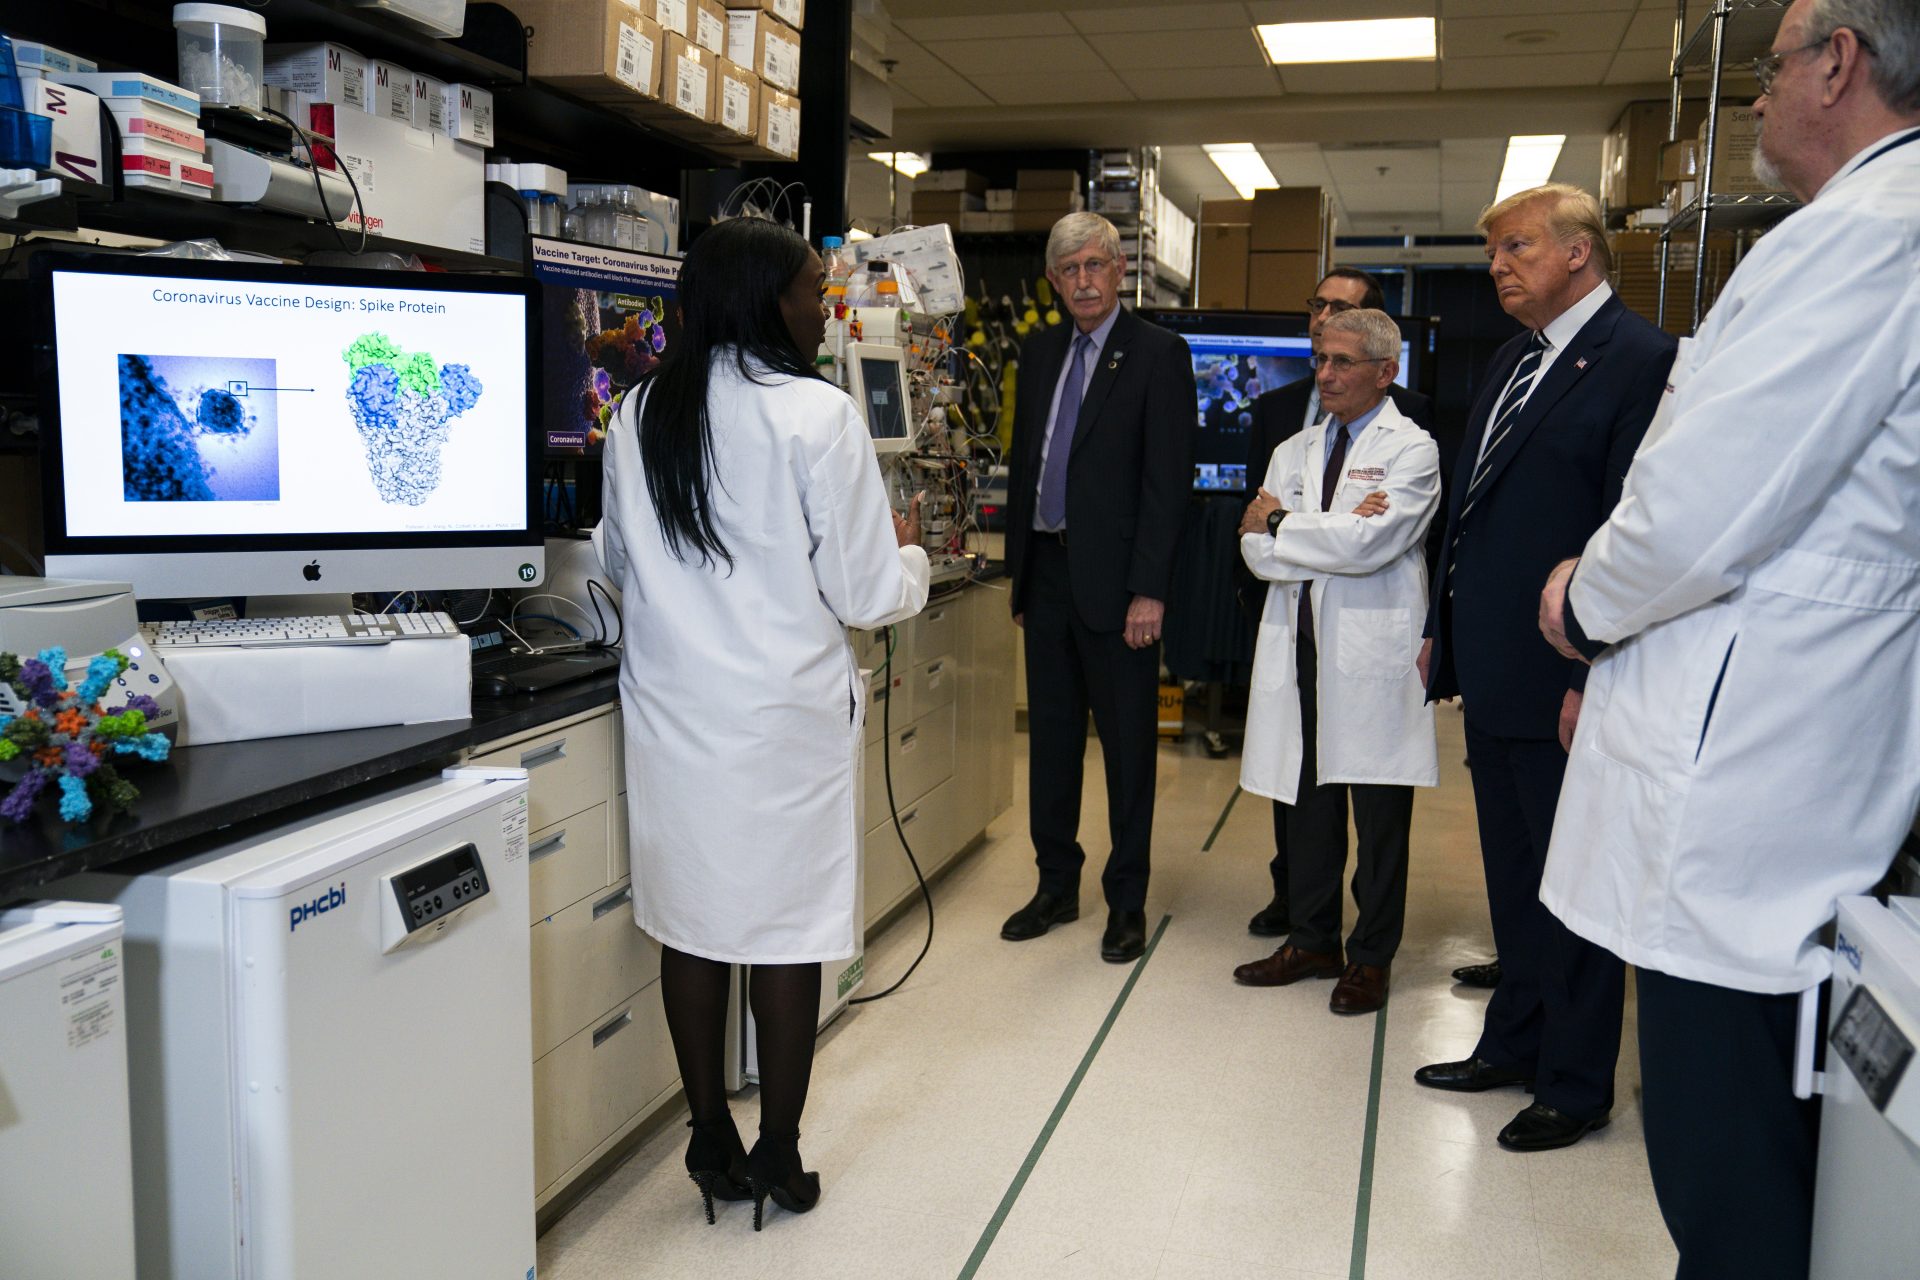 Dr. Kizzmekia Corbett, Senior Research Fellow and Scientific Lead for Coronavirus Vaccines and Immunopathogenesis Team in the Viral Pathogenesis Laboratory, left, talks with President Donald Trump as he tours the Viral Pathogenesis Laboratory at the National Institutes of Health, Tuesday, March 3, 2020, in Bethesda, Md.